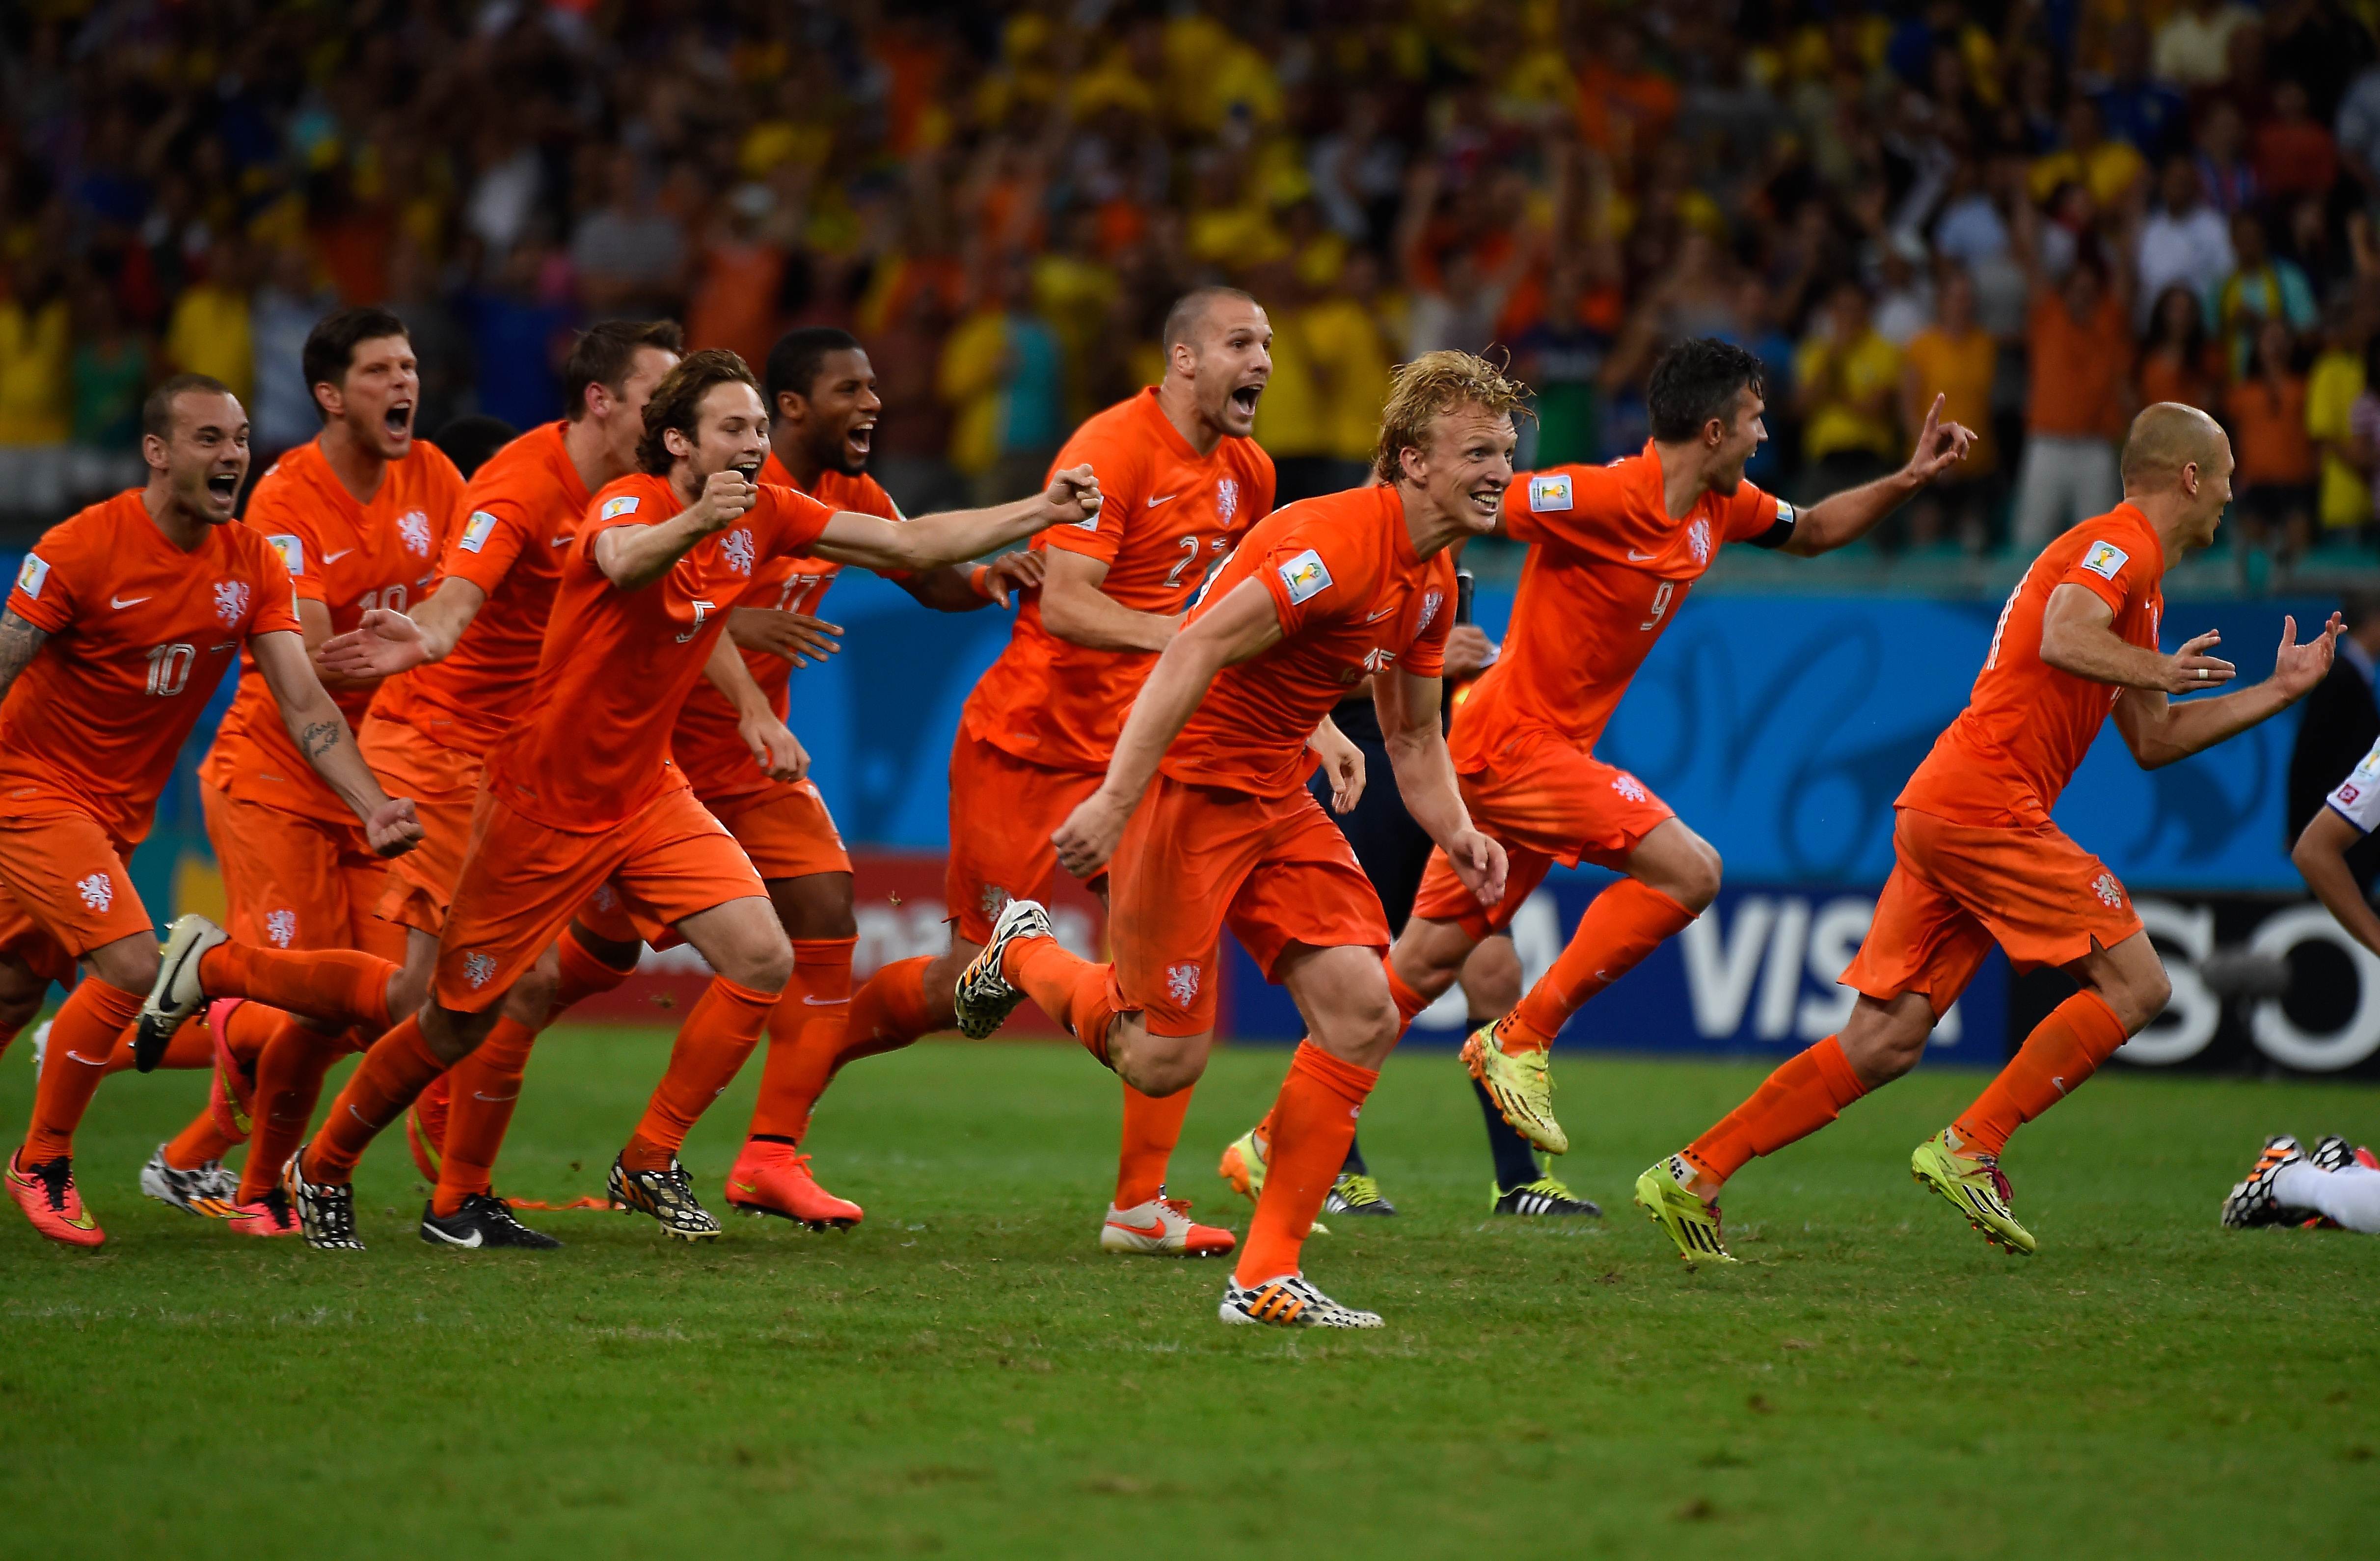 Dutch beat Costa Rica in shootout to advance at World Cup | The Japan Times